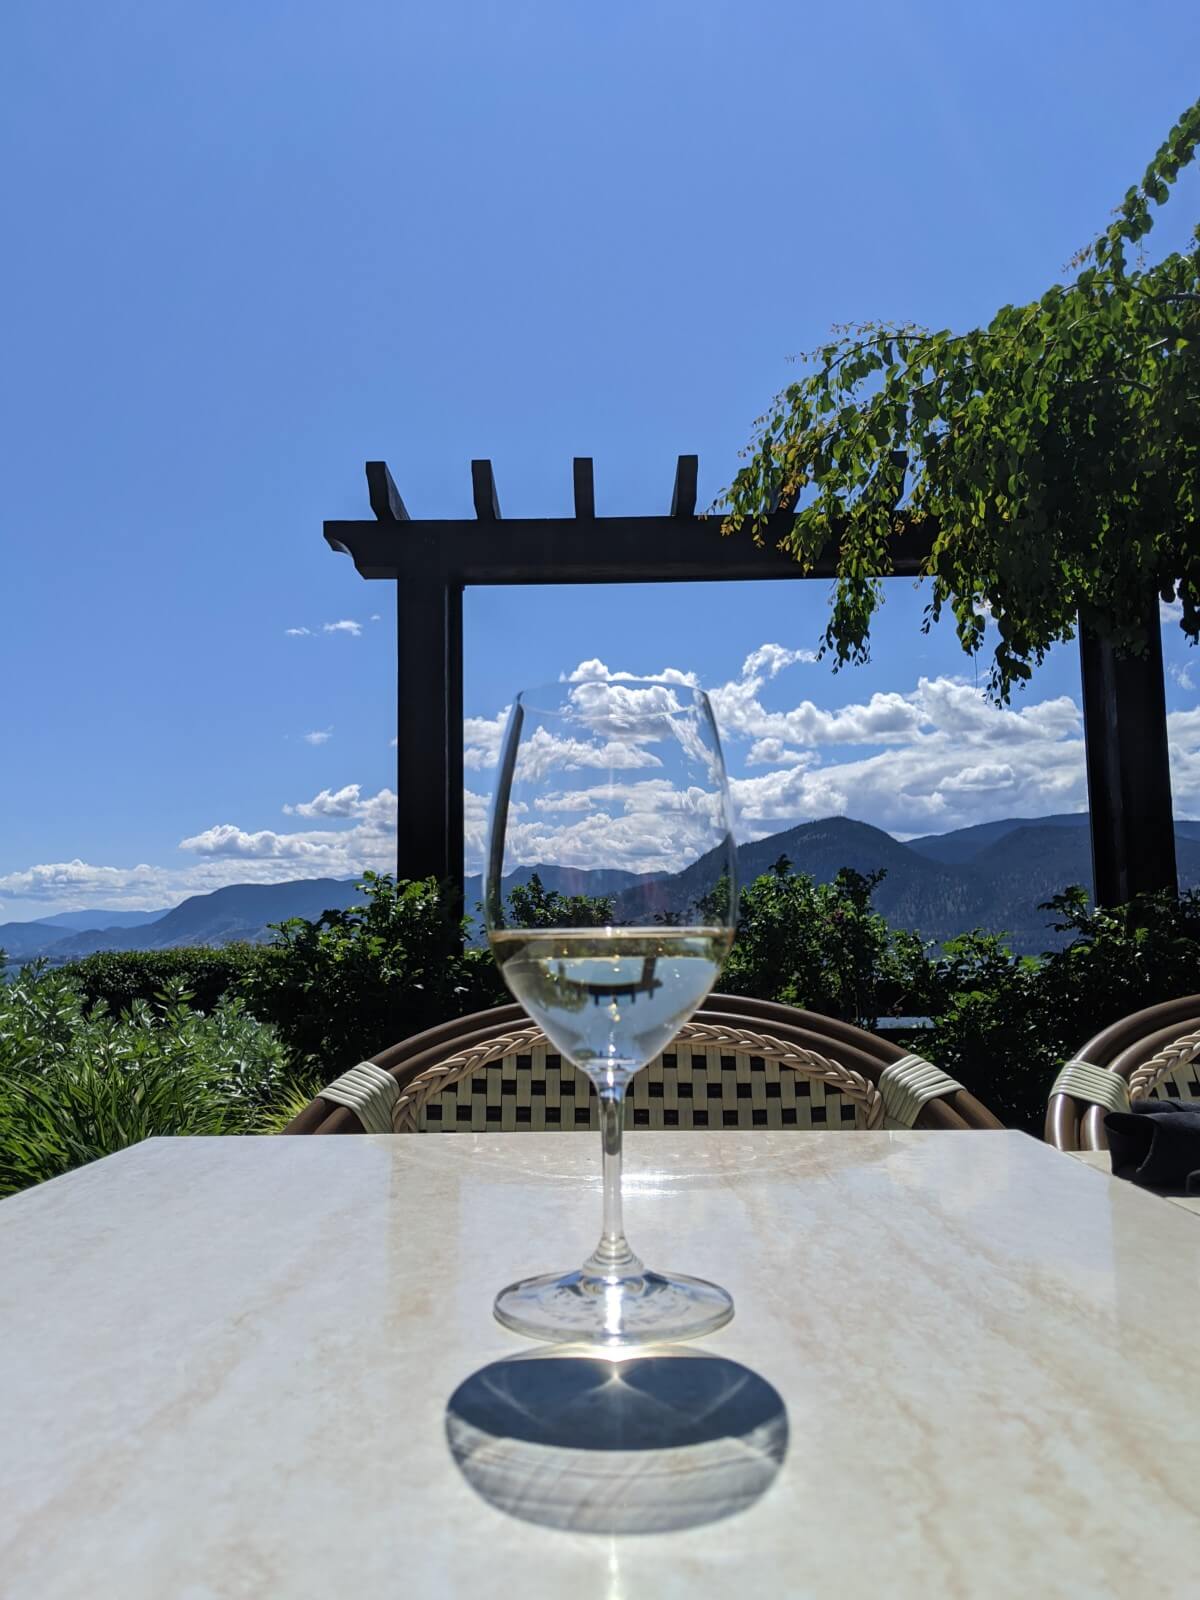 A singular wine glass (half filled with white wine) sits on a light coloured table, in front of a scenic view of plants (foreground) and mountains (background)